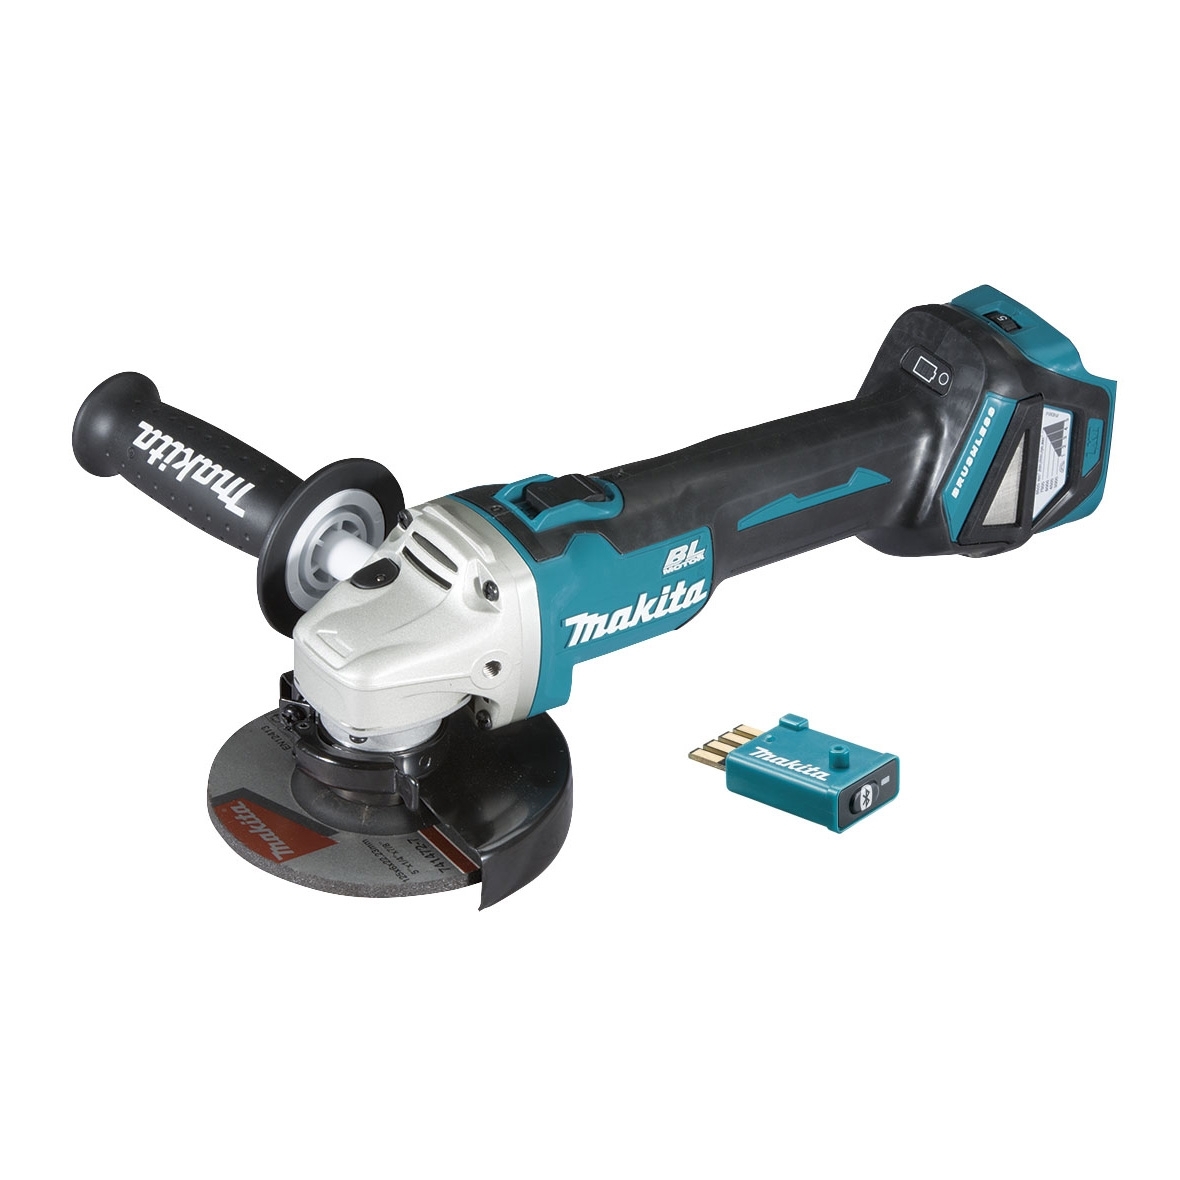 Makita 18V AWS Brushless 125mm Slide Switch Variable Speed Angle Grinder With Kick Back Detection (tool only) DGA512ZU